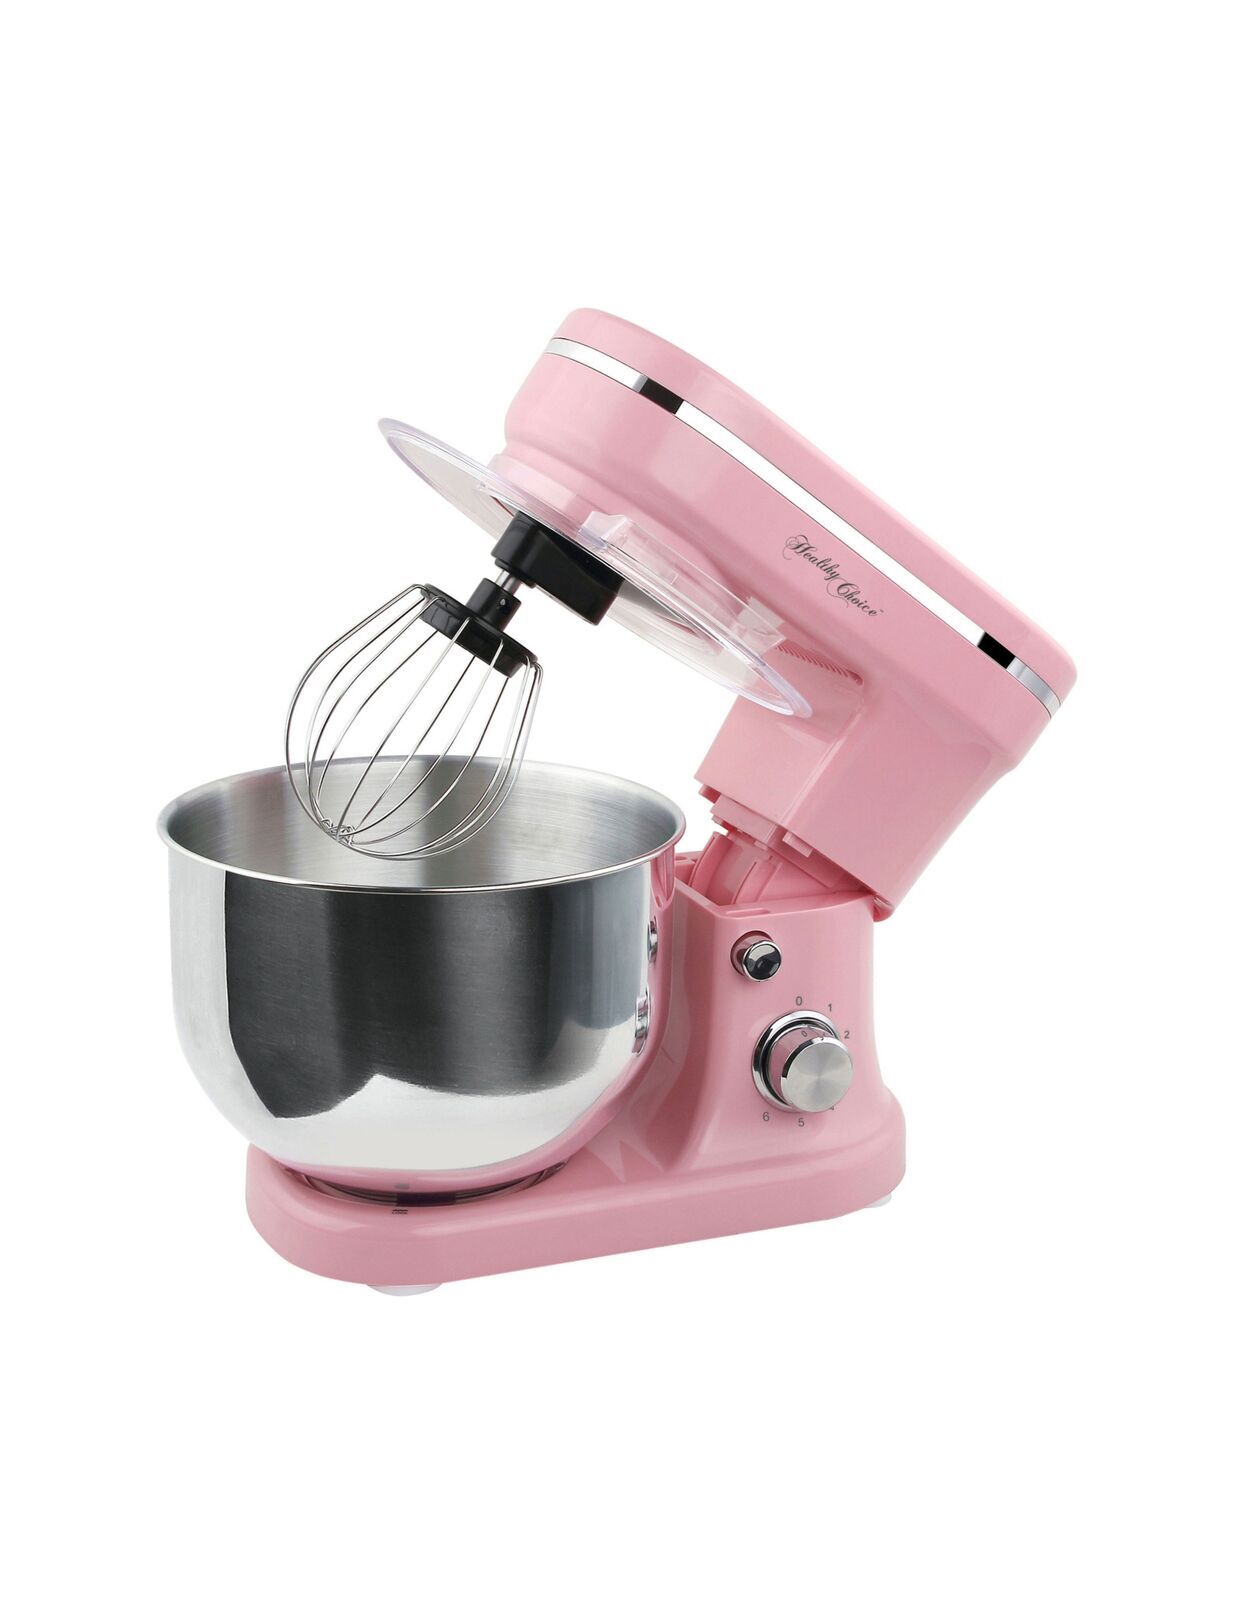 1200W Mix Master 5L Kitchen Stand (Pink) w/ Bowl/ Whisk/ Beater